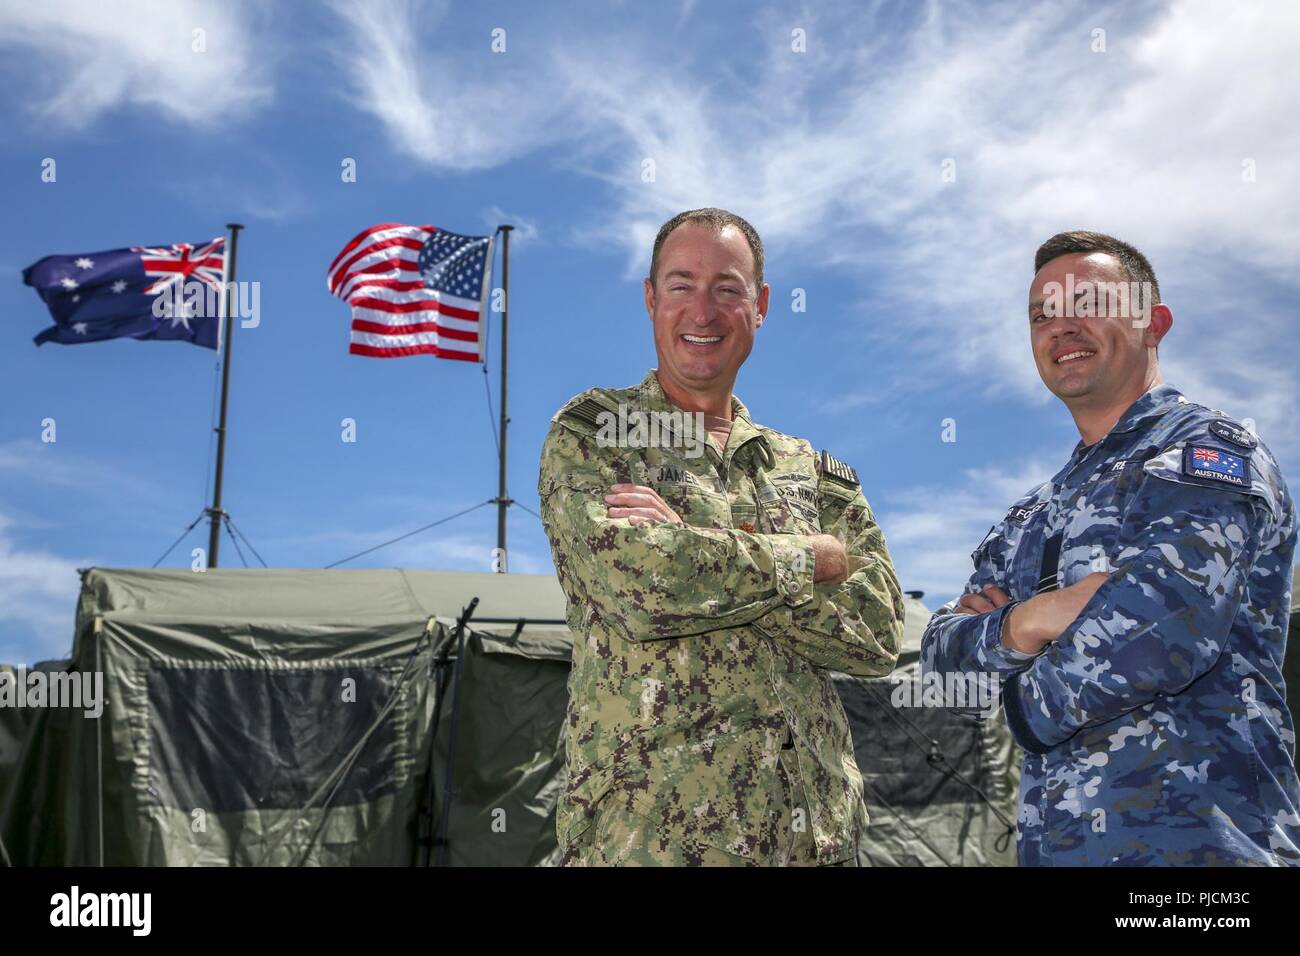 JOINT BASE PEARL HARBOR-HICKAM, Hawaii (July 21, 2018) U.S. Navy Lt. Cmdr. Tres James, combined task group operations director, and Royal Australian Air Force Flight Lieutenant David Reid, combined task group battle watch captain, stand outside the combined watch floor and mobile tactical operations center during Rim of the Pacific (RIMPAC) exercise, July 21. Twenty-five nations, 46 ships, five submarines, and about 200 aircraft and 25,000 personnel are participating in RIMPAC from June 27 to Aug. 2 in and around the Hawaiian Islands and Southern California. The world’s largest international m Stock Photo